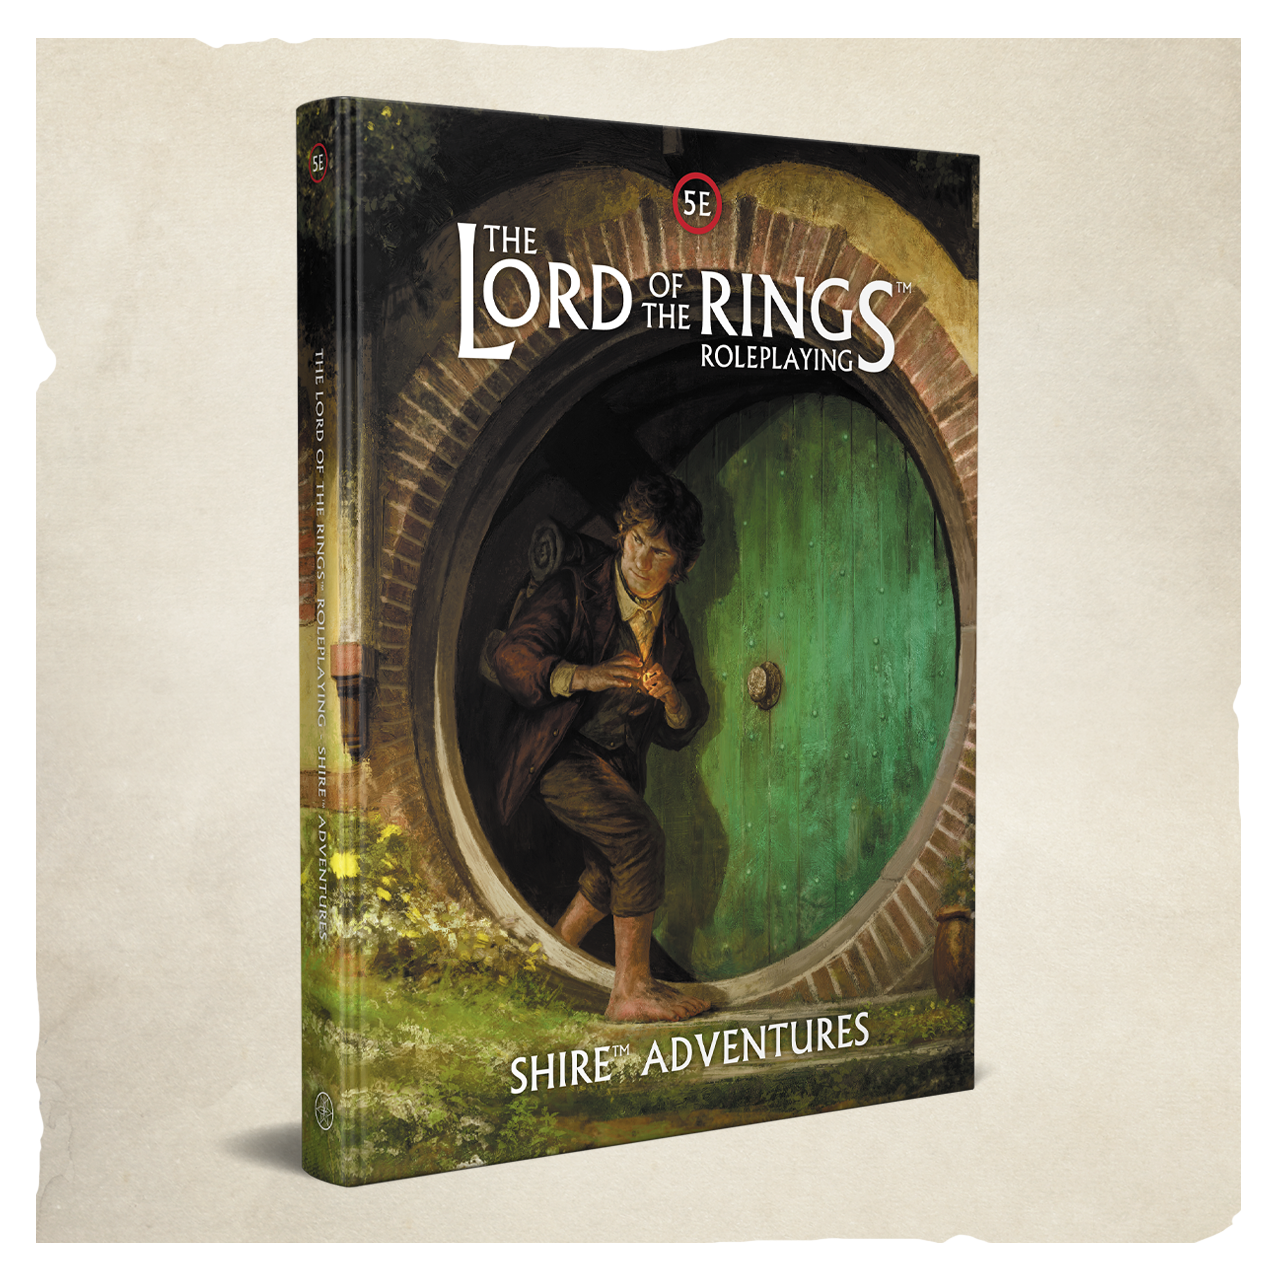 The Lord of the Rings Rpg (5E): Shire Adventures